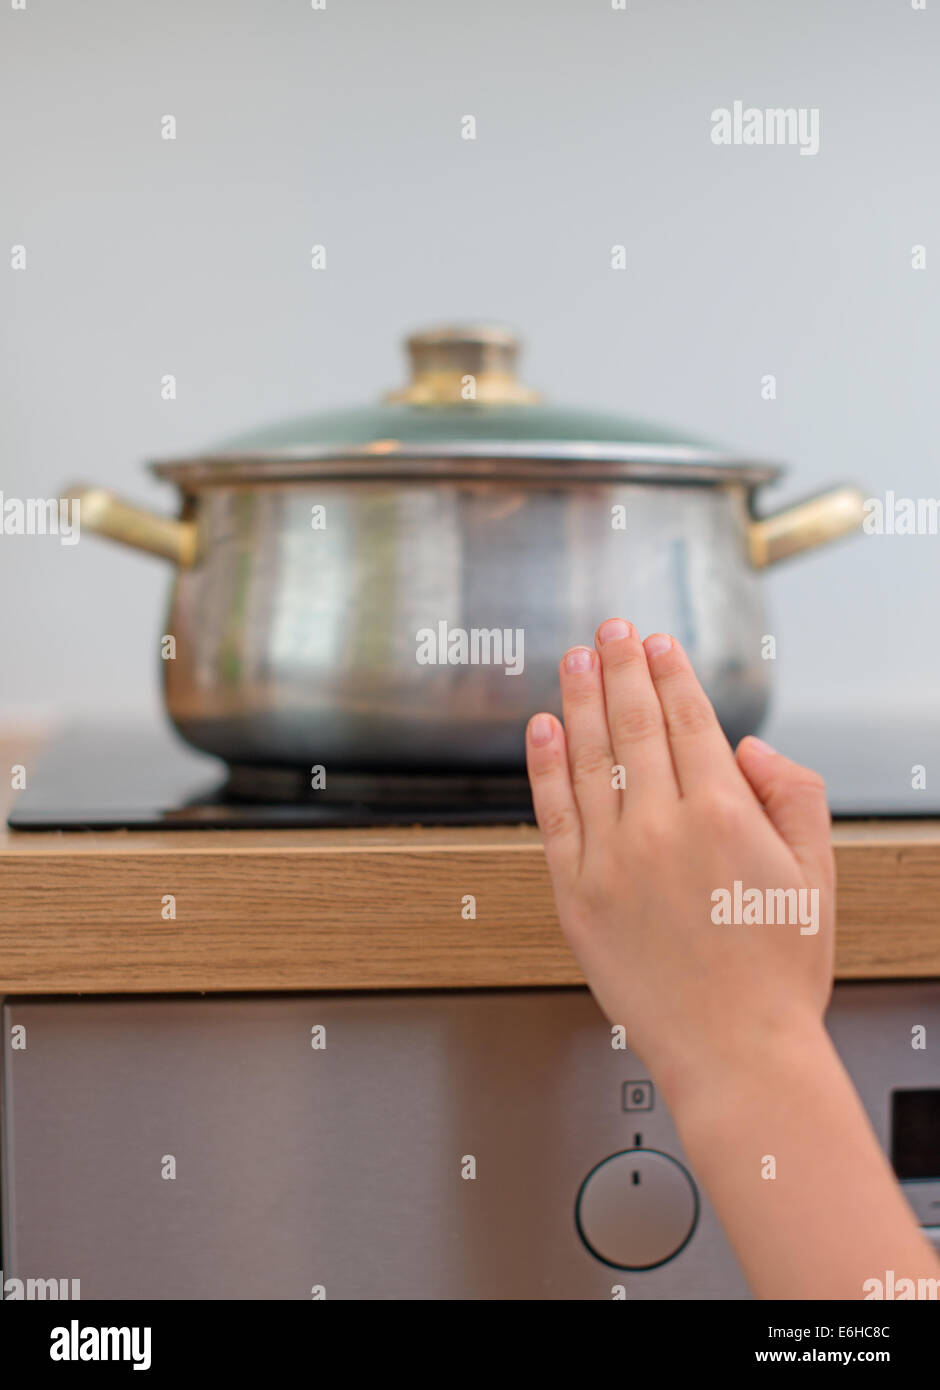 Putting Your Hand on a Hot Stove